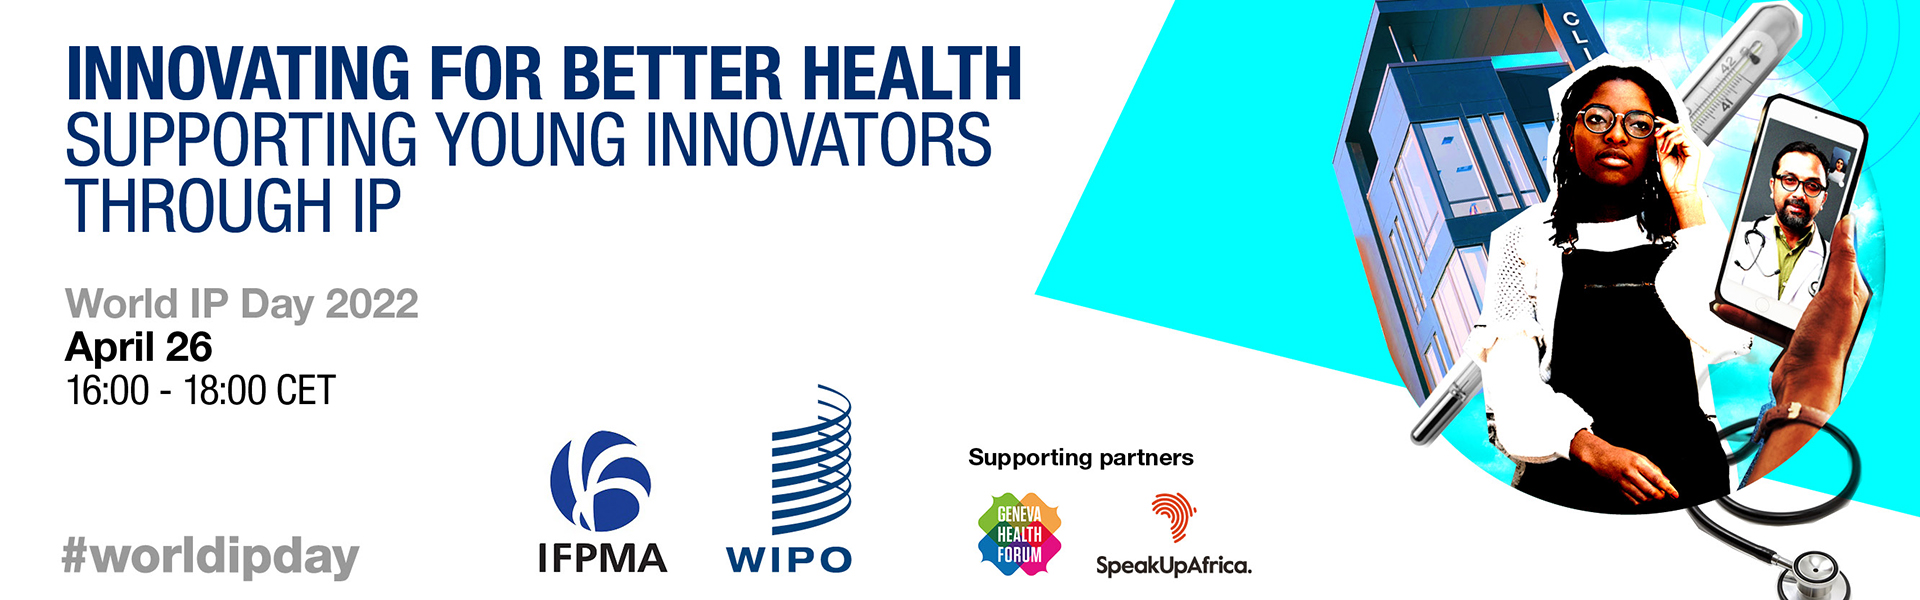 Innovating for Better Health: Supporting Young Innovators through IP